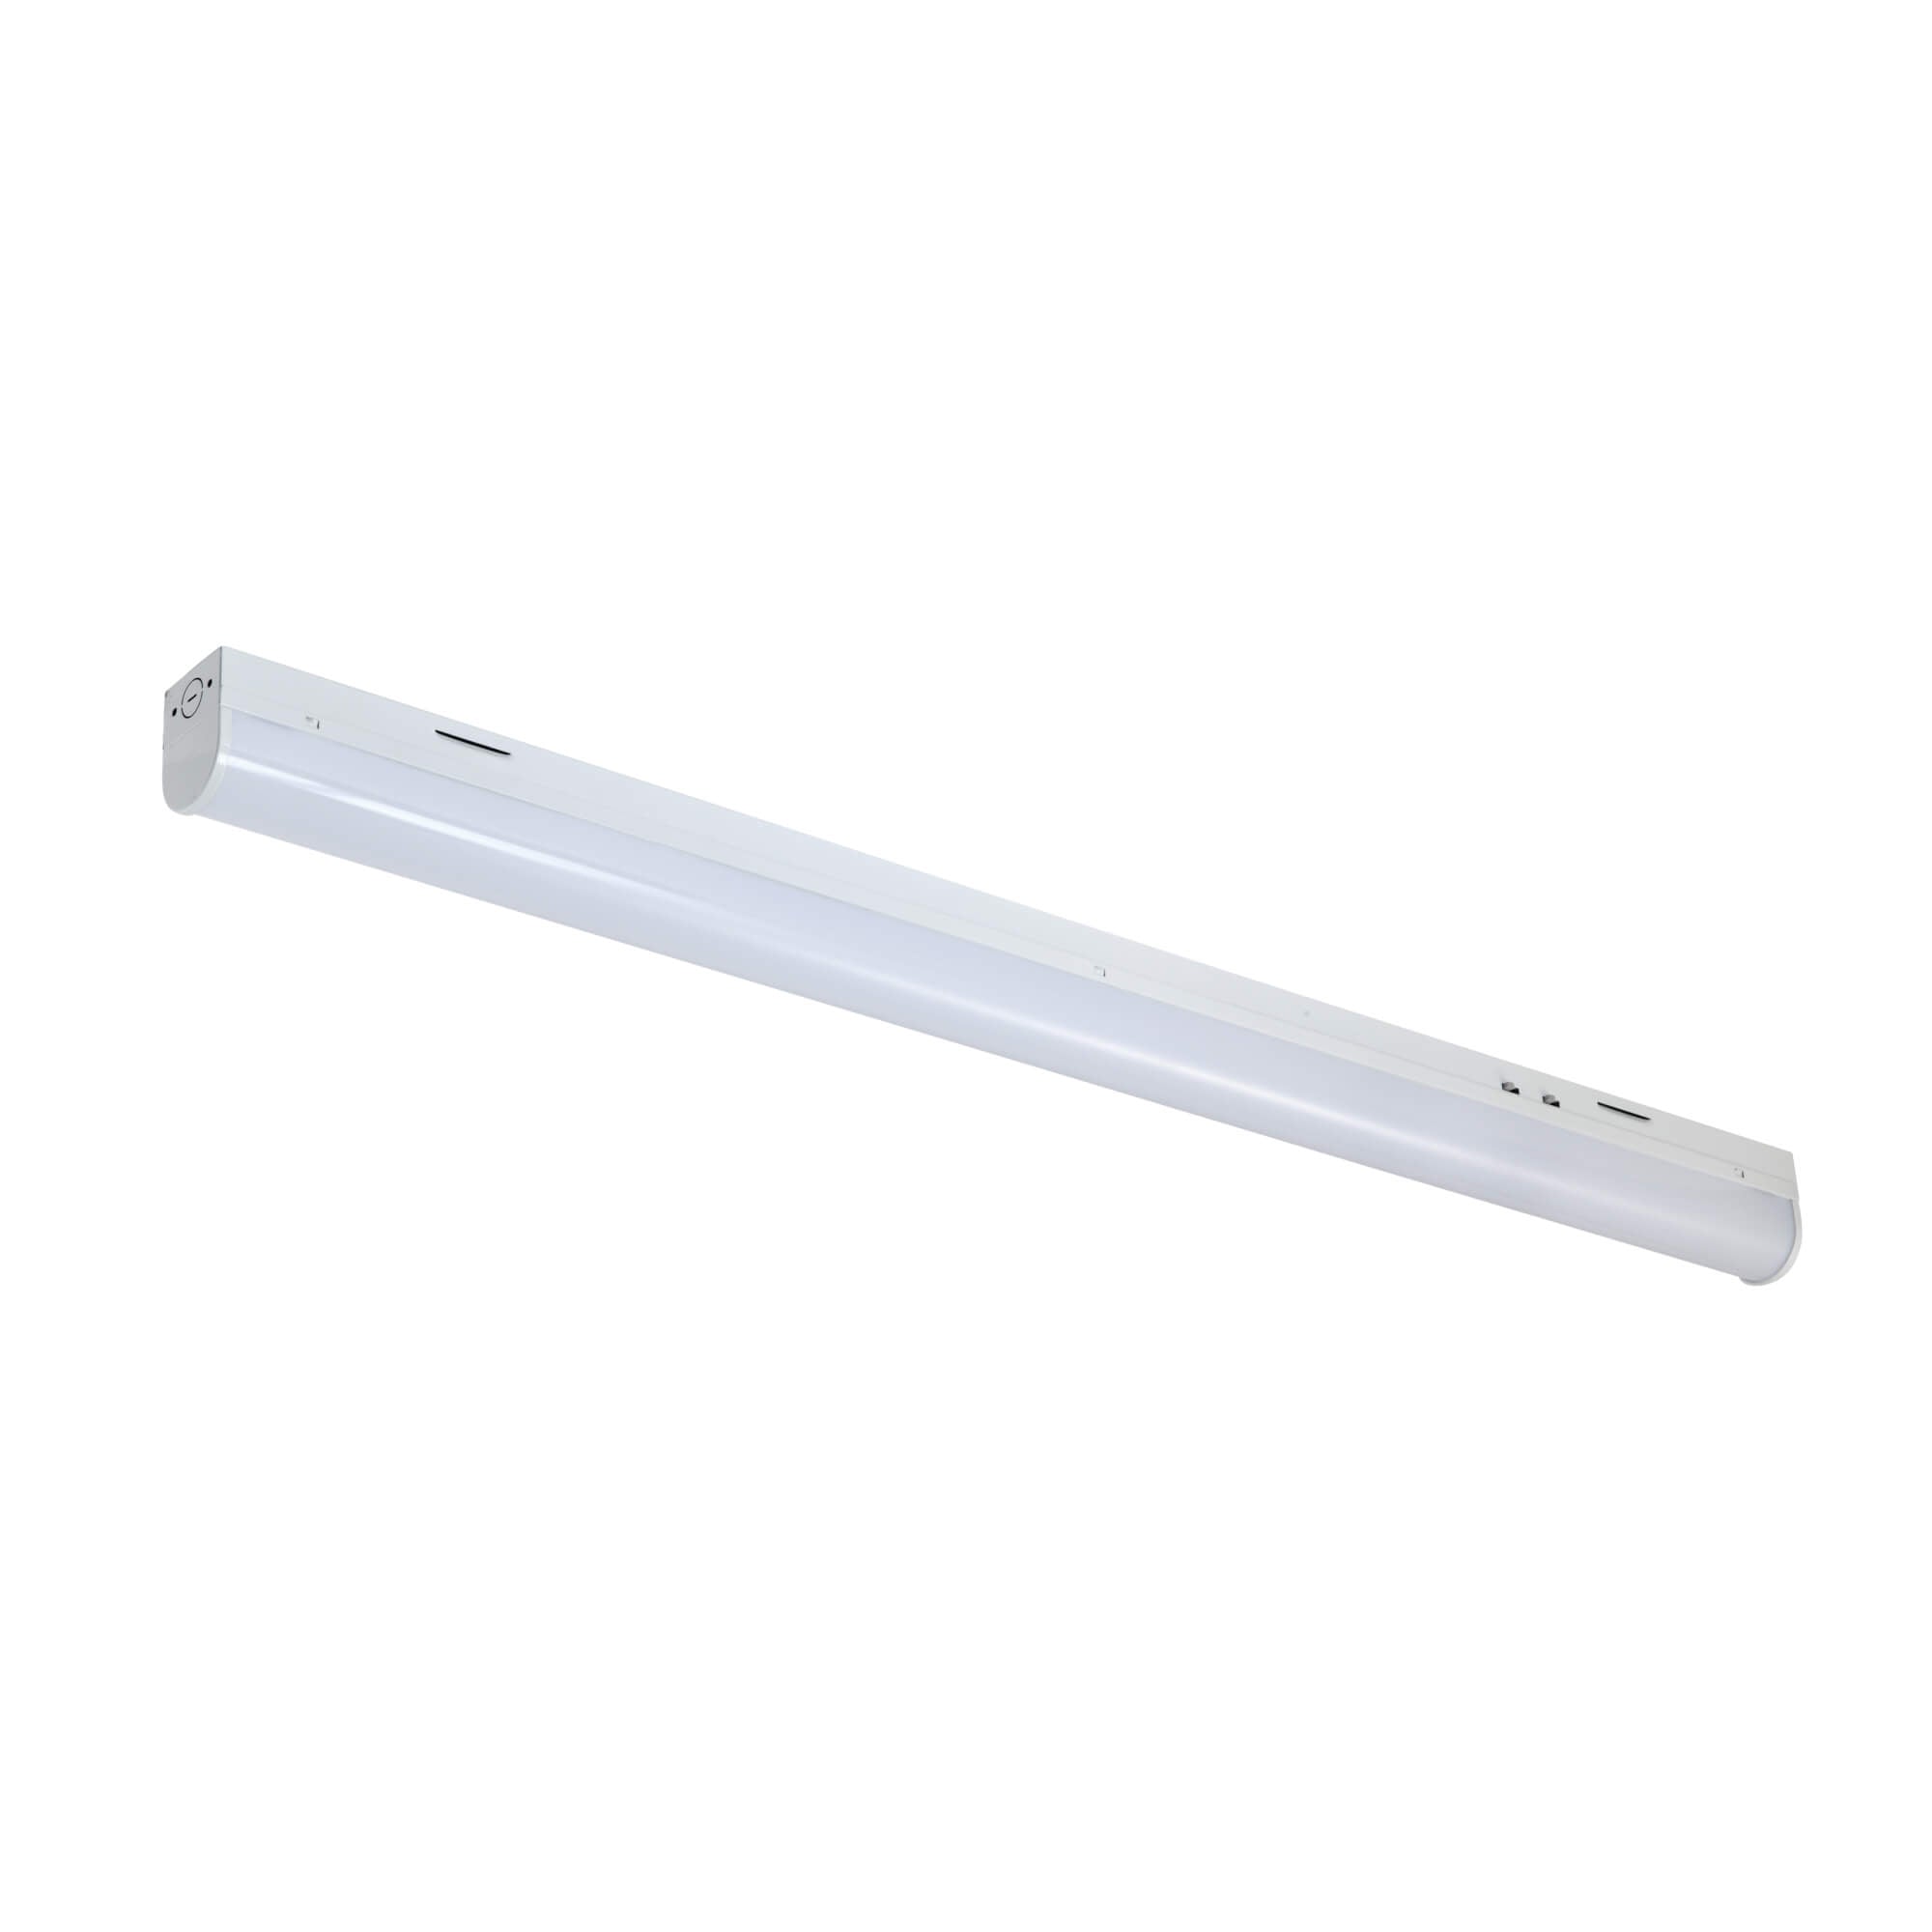 Versatile Halcon LED Strip Light HG-L205B with field-selectable wattages and CCTs for commercial and residential lighting